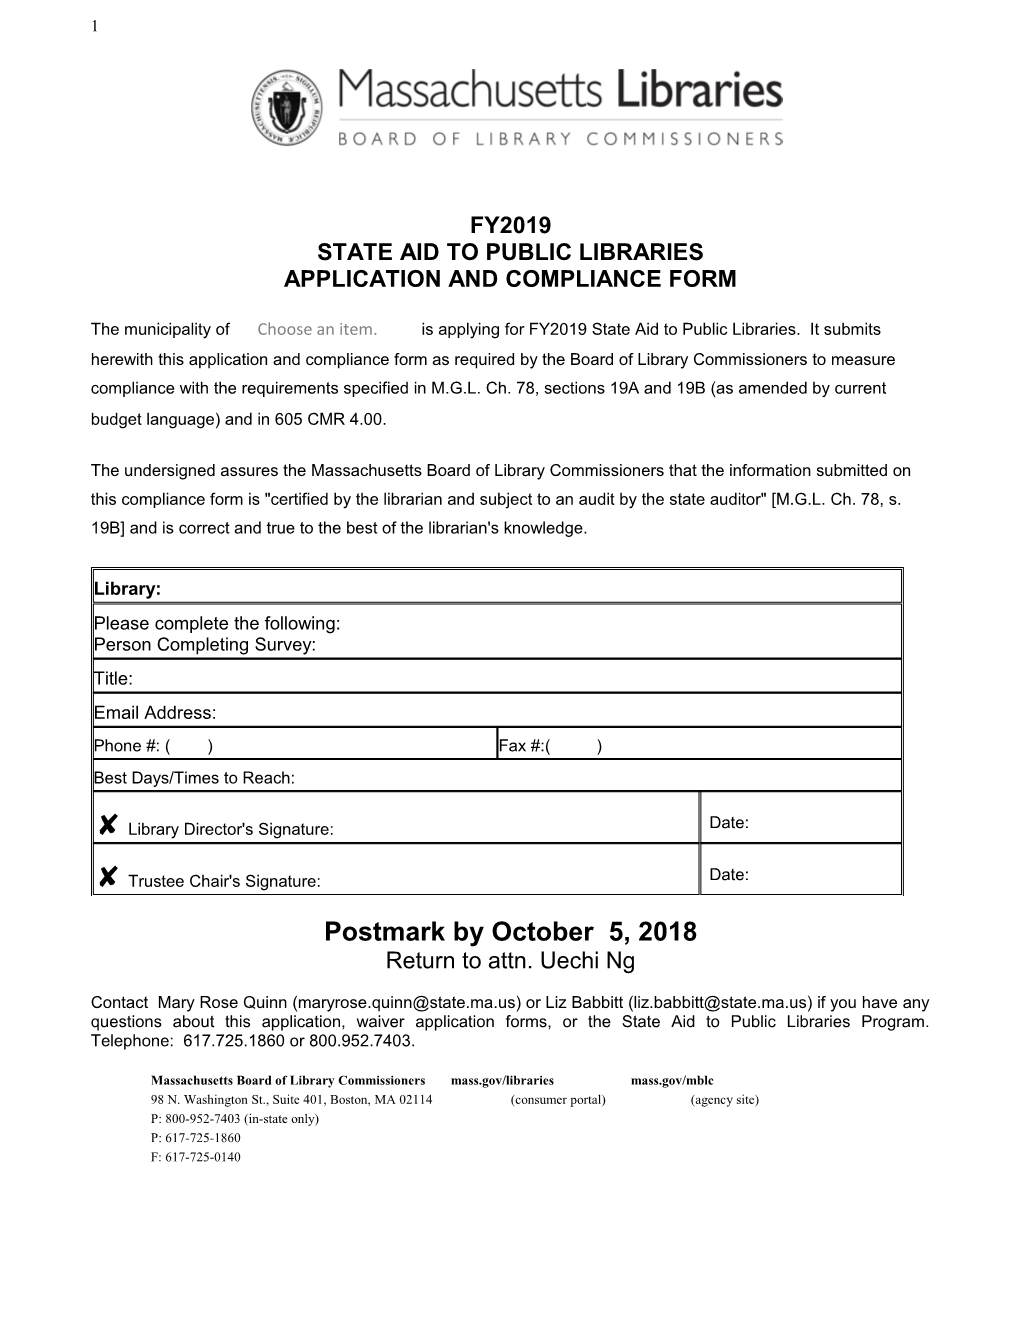 FY19 State Aid to Public Libraries Compliance Form